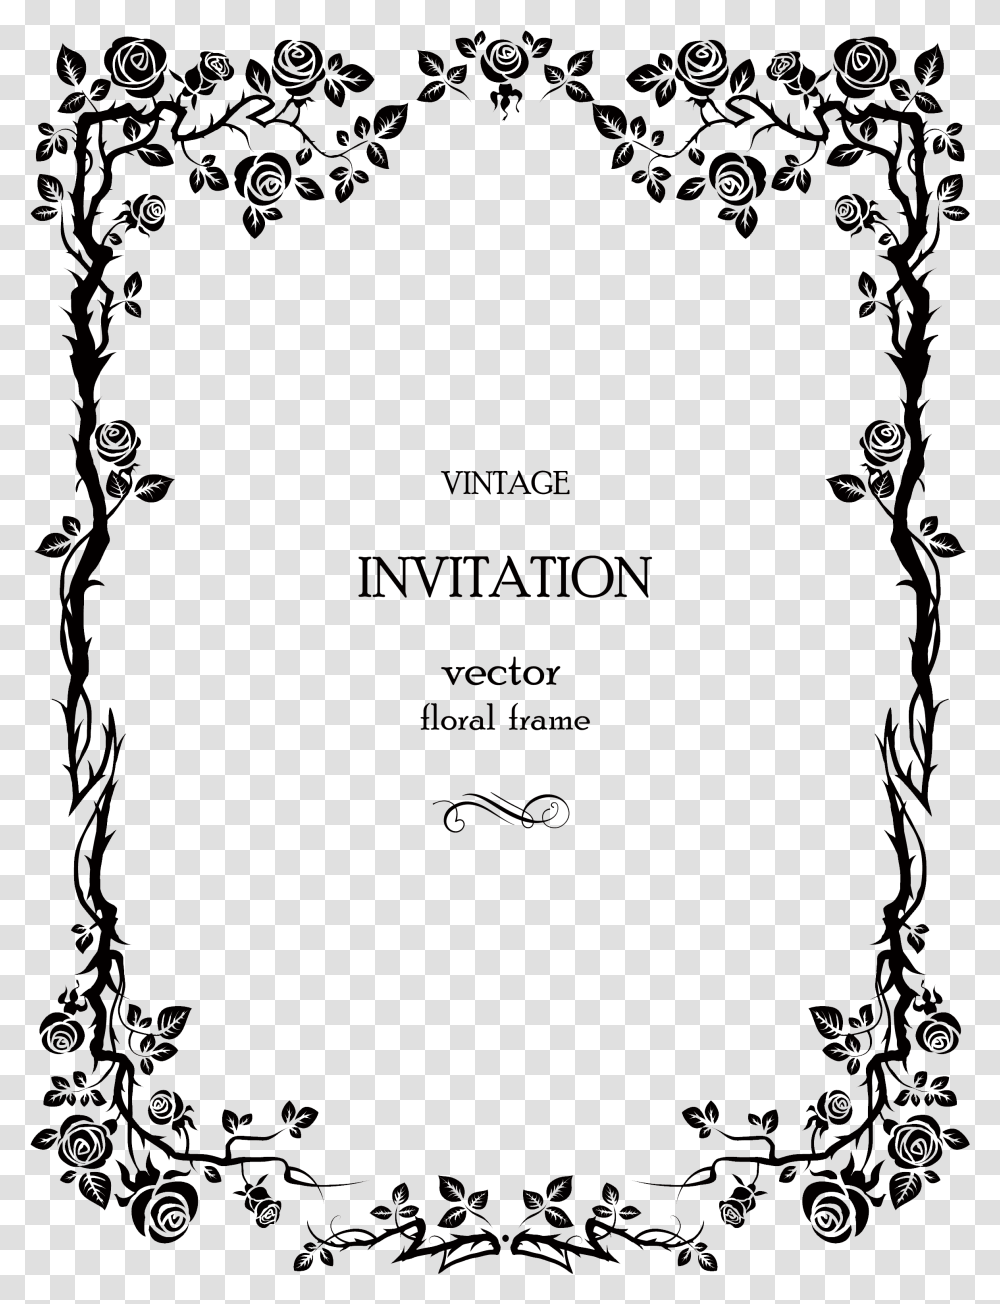 Clip Art Flower Royalty Free Clip Flower Border Black And White, Outdoors, Nature, Building, Tree Transparent Png